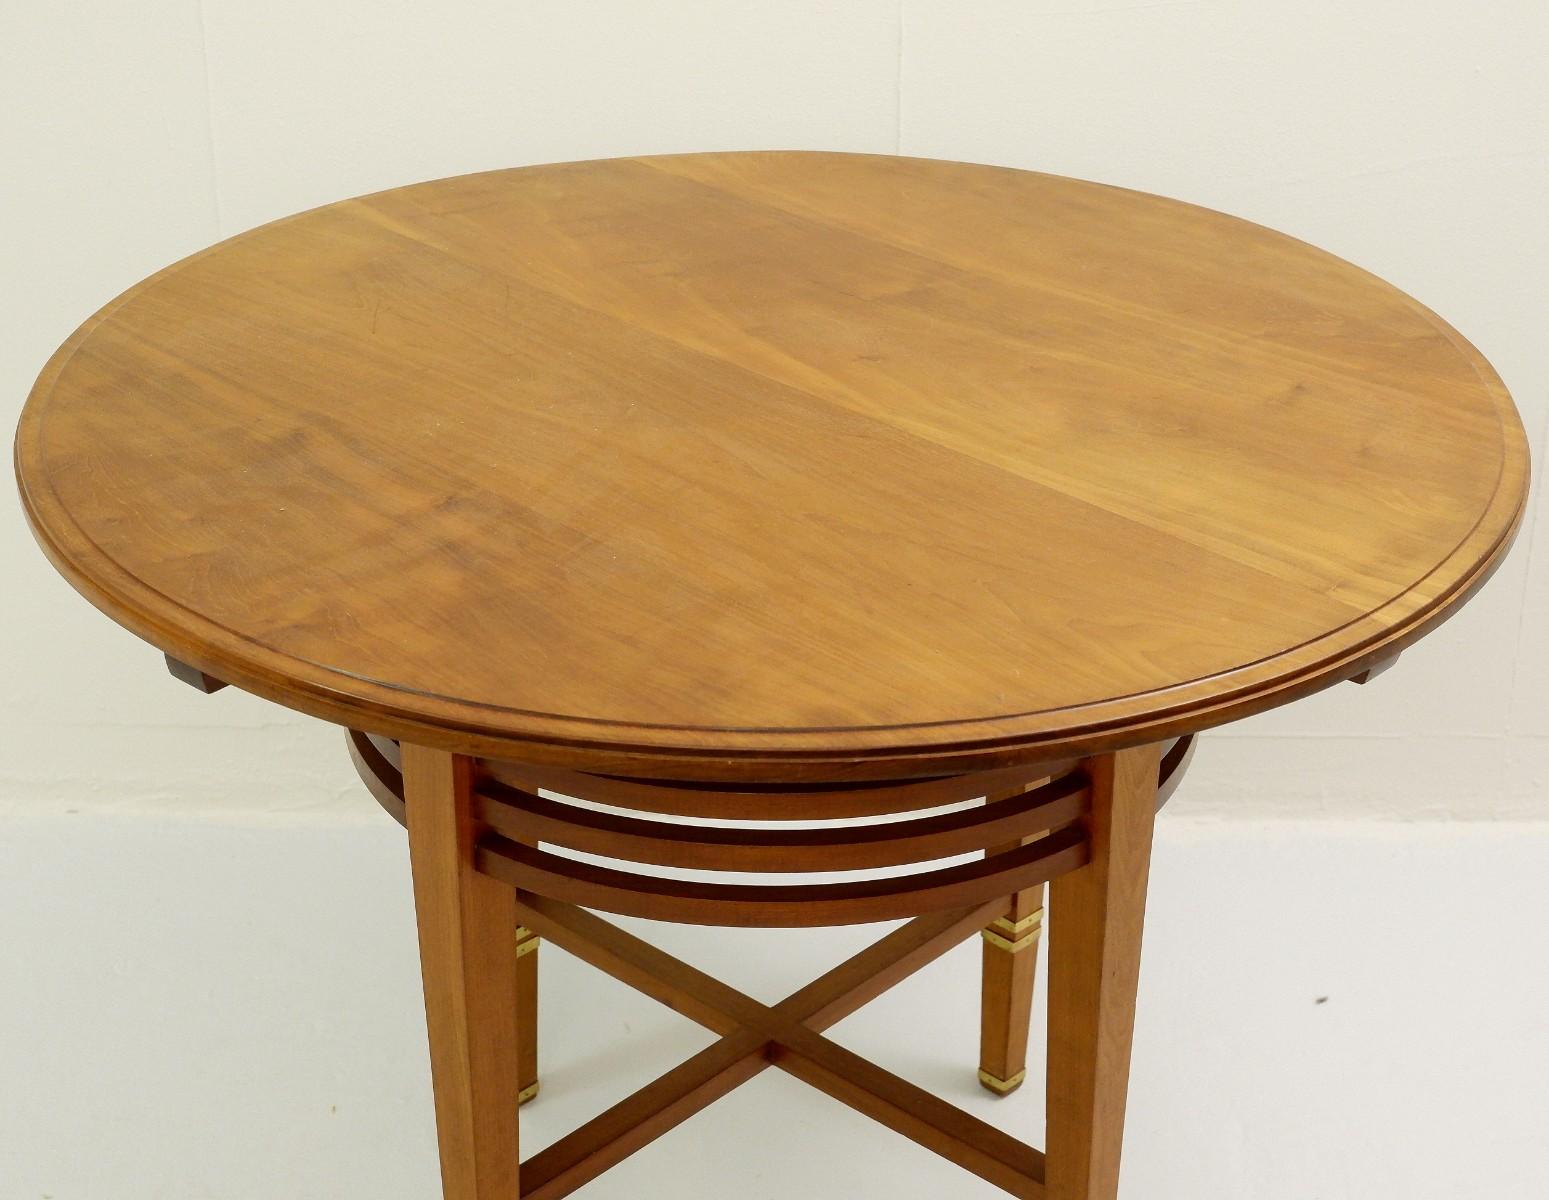 Liszt Table by Gustave Serrurier Bovy, Mahogany and Brass, 1900s For Sale 2